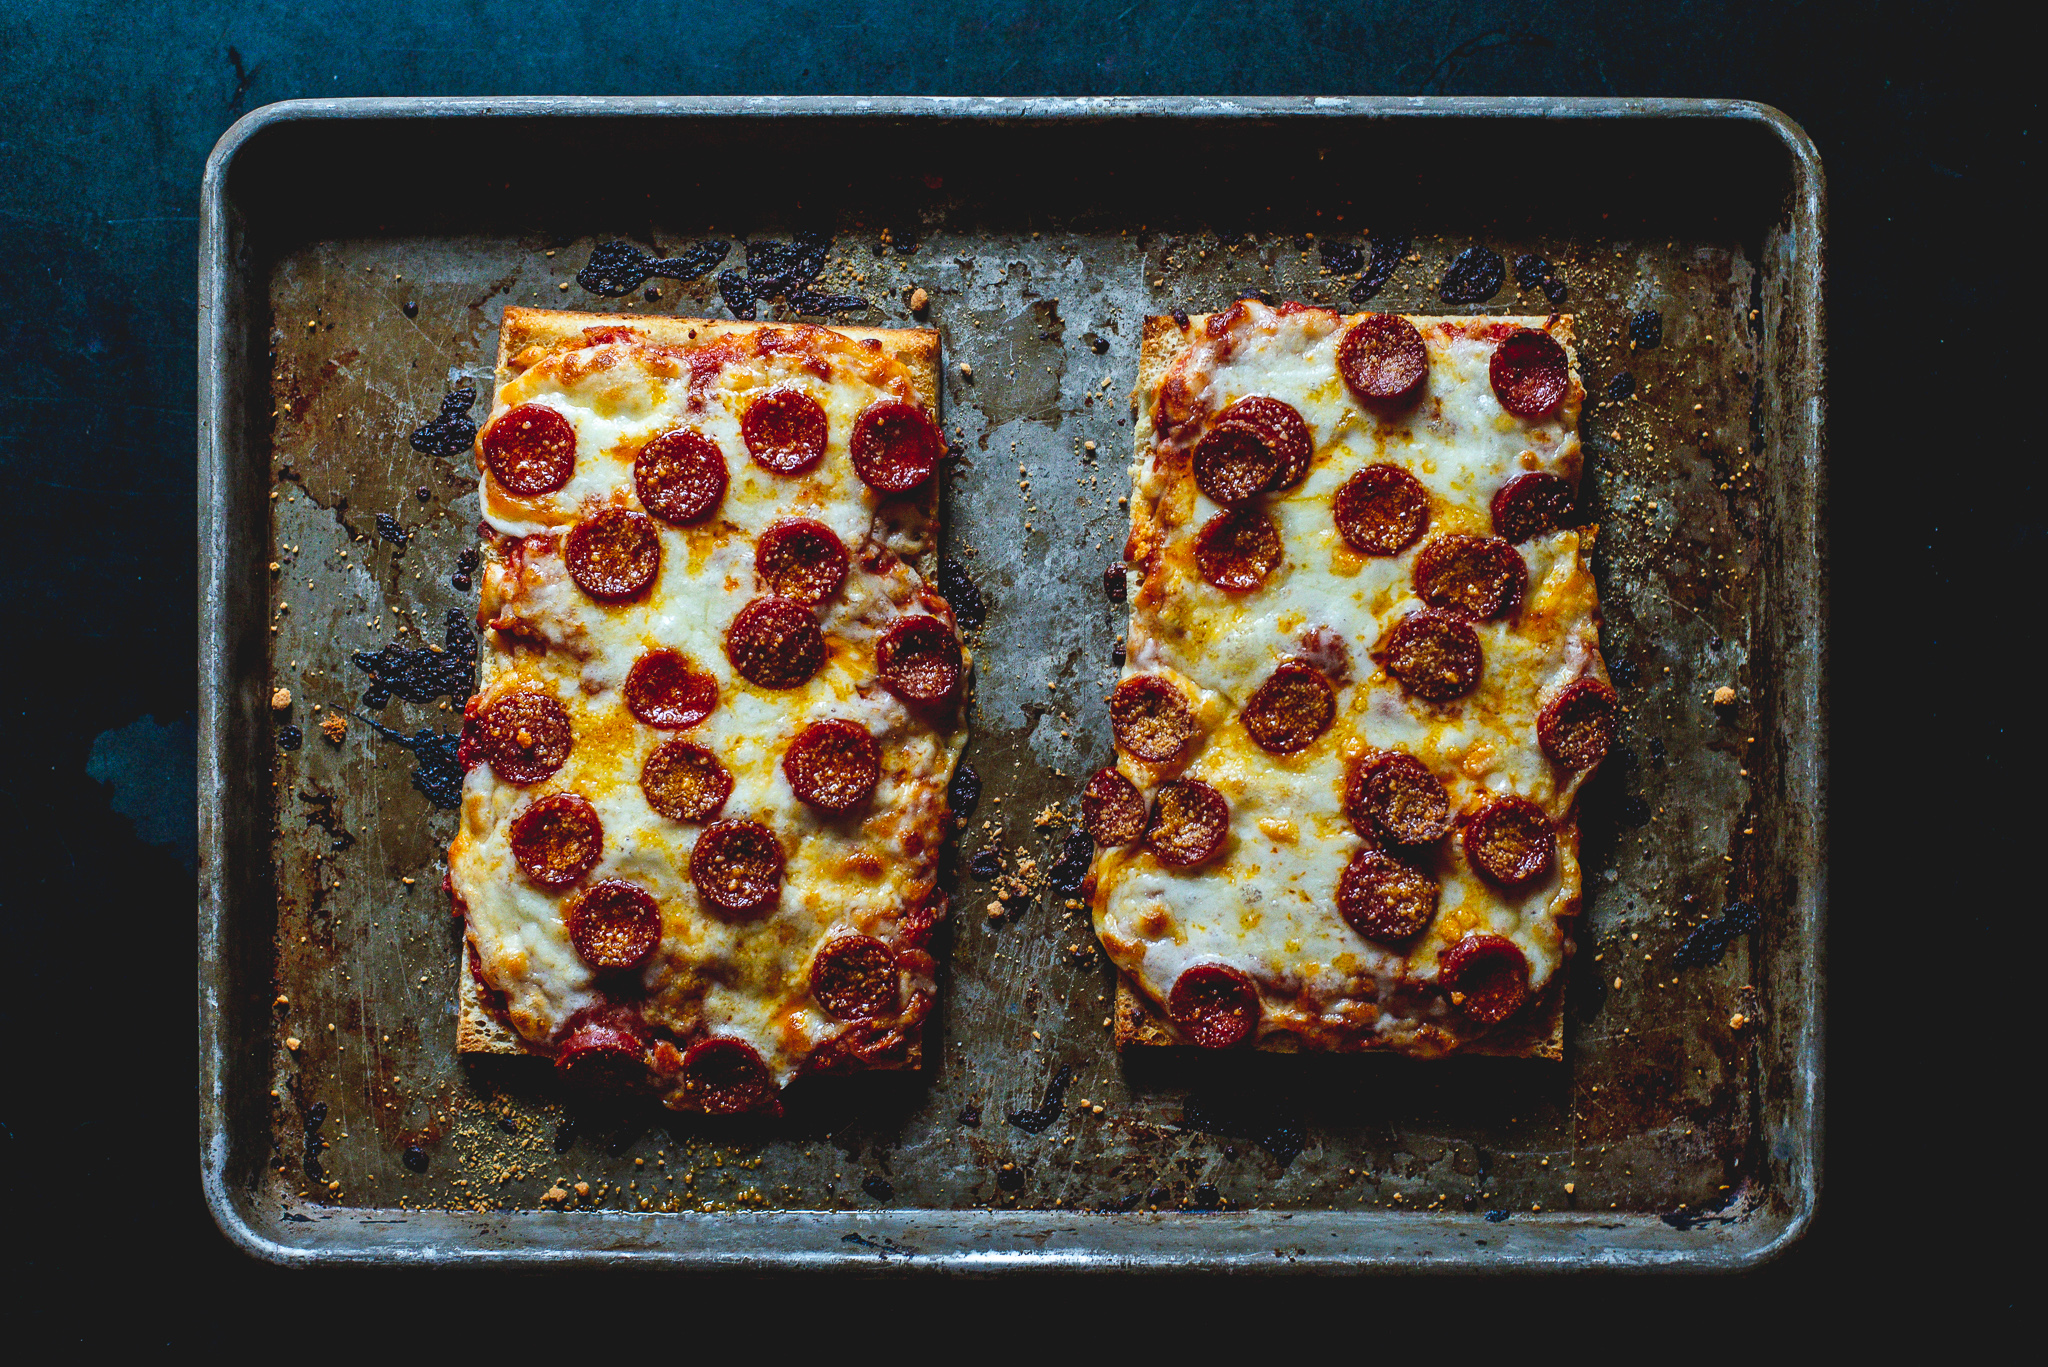 Cafeteria-style pepperoni pan pizza at home.